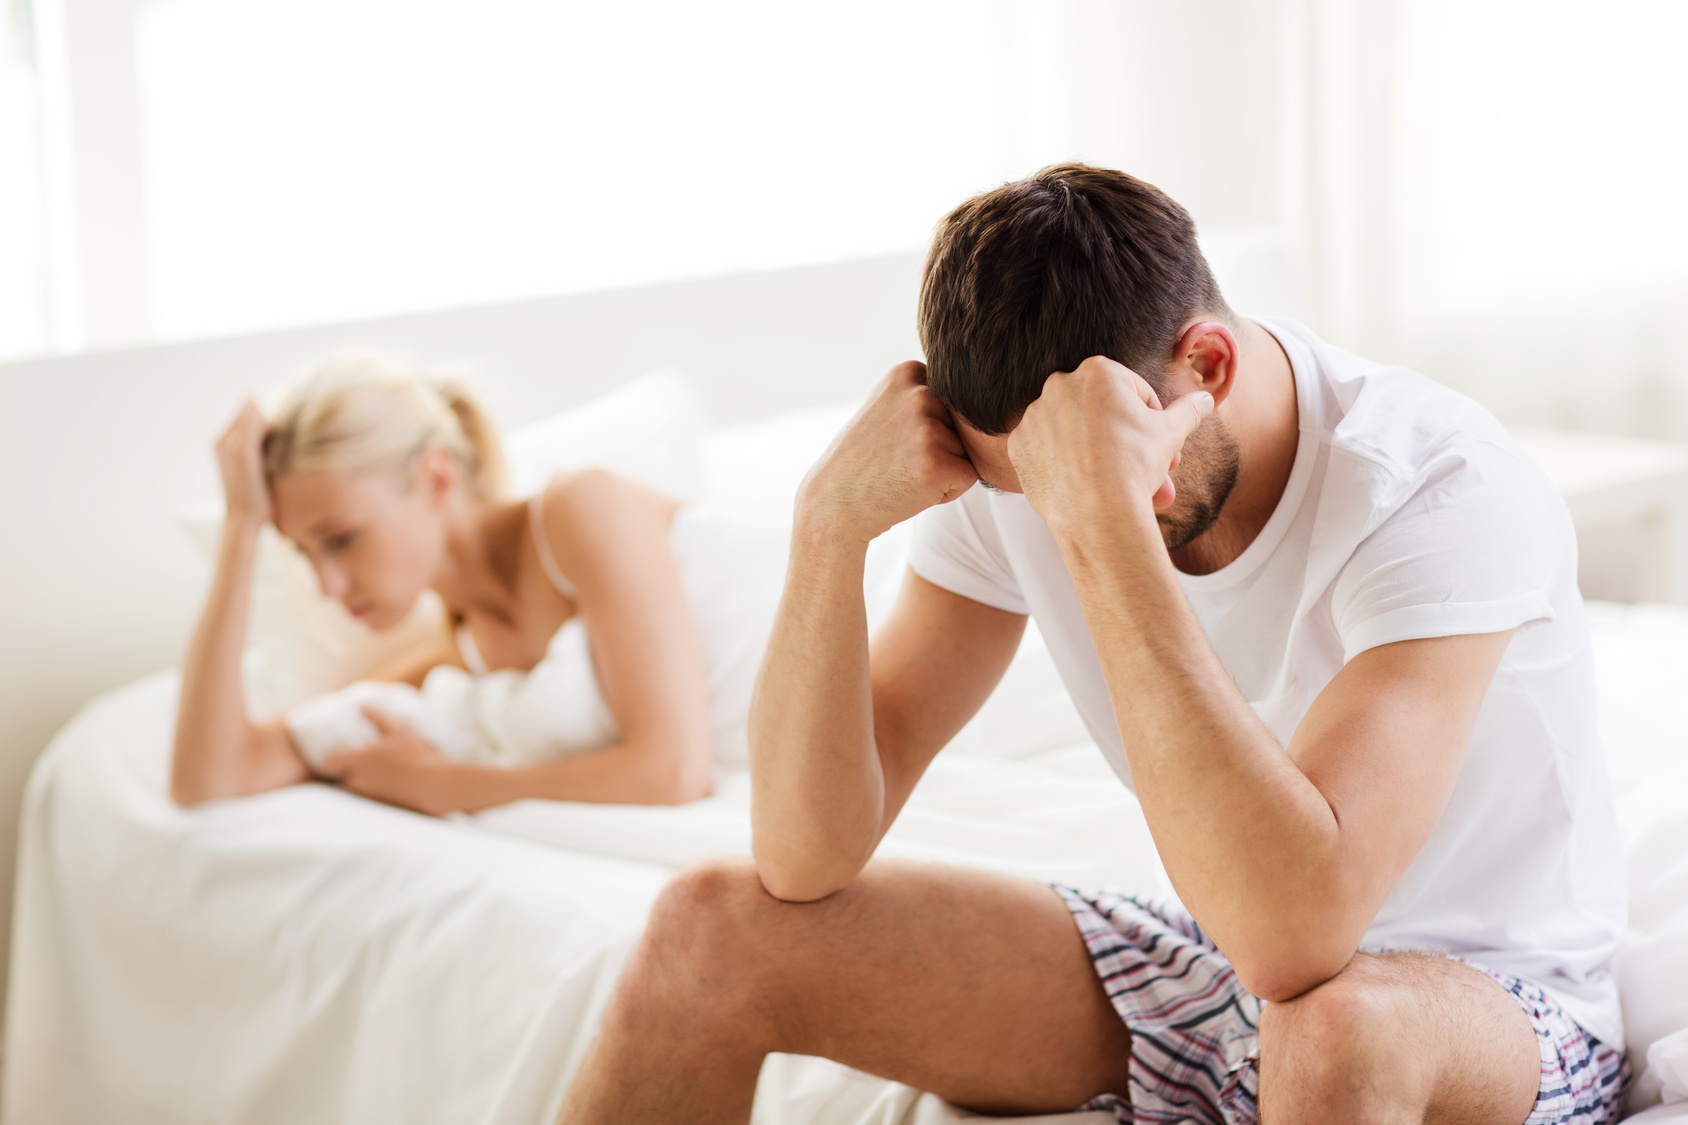 Impotence: How To Deal With It